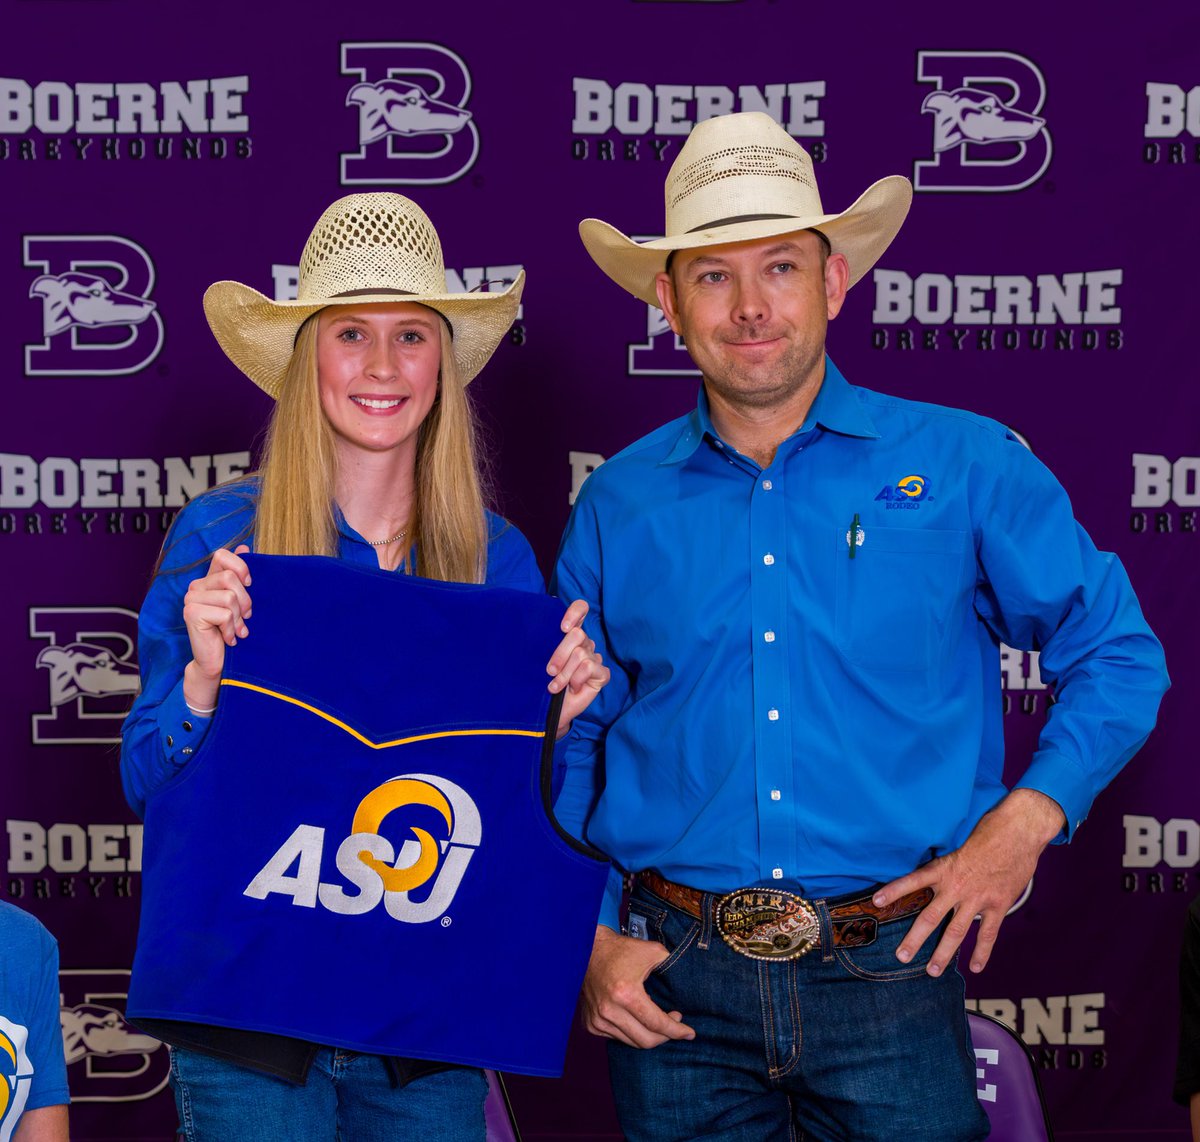 Exciting news! Layla Weaks, our senior student athletic trainer, has signed with Angelo State University to pursue her passion for rodeo at the collegiate level. Congrats and best wishes, Layla! Go Rams! 💙💛🐏 #ProudMoment #StudentAthlete #GoRams